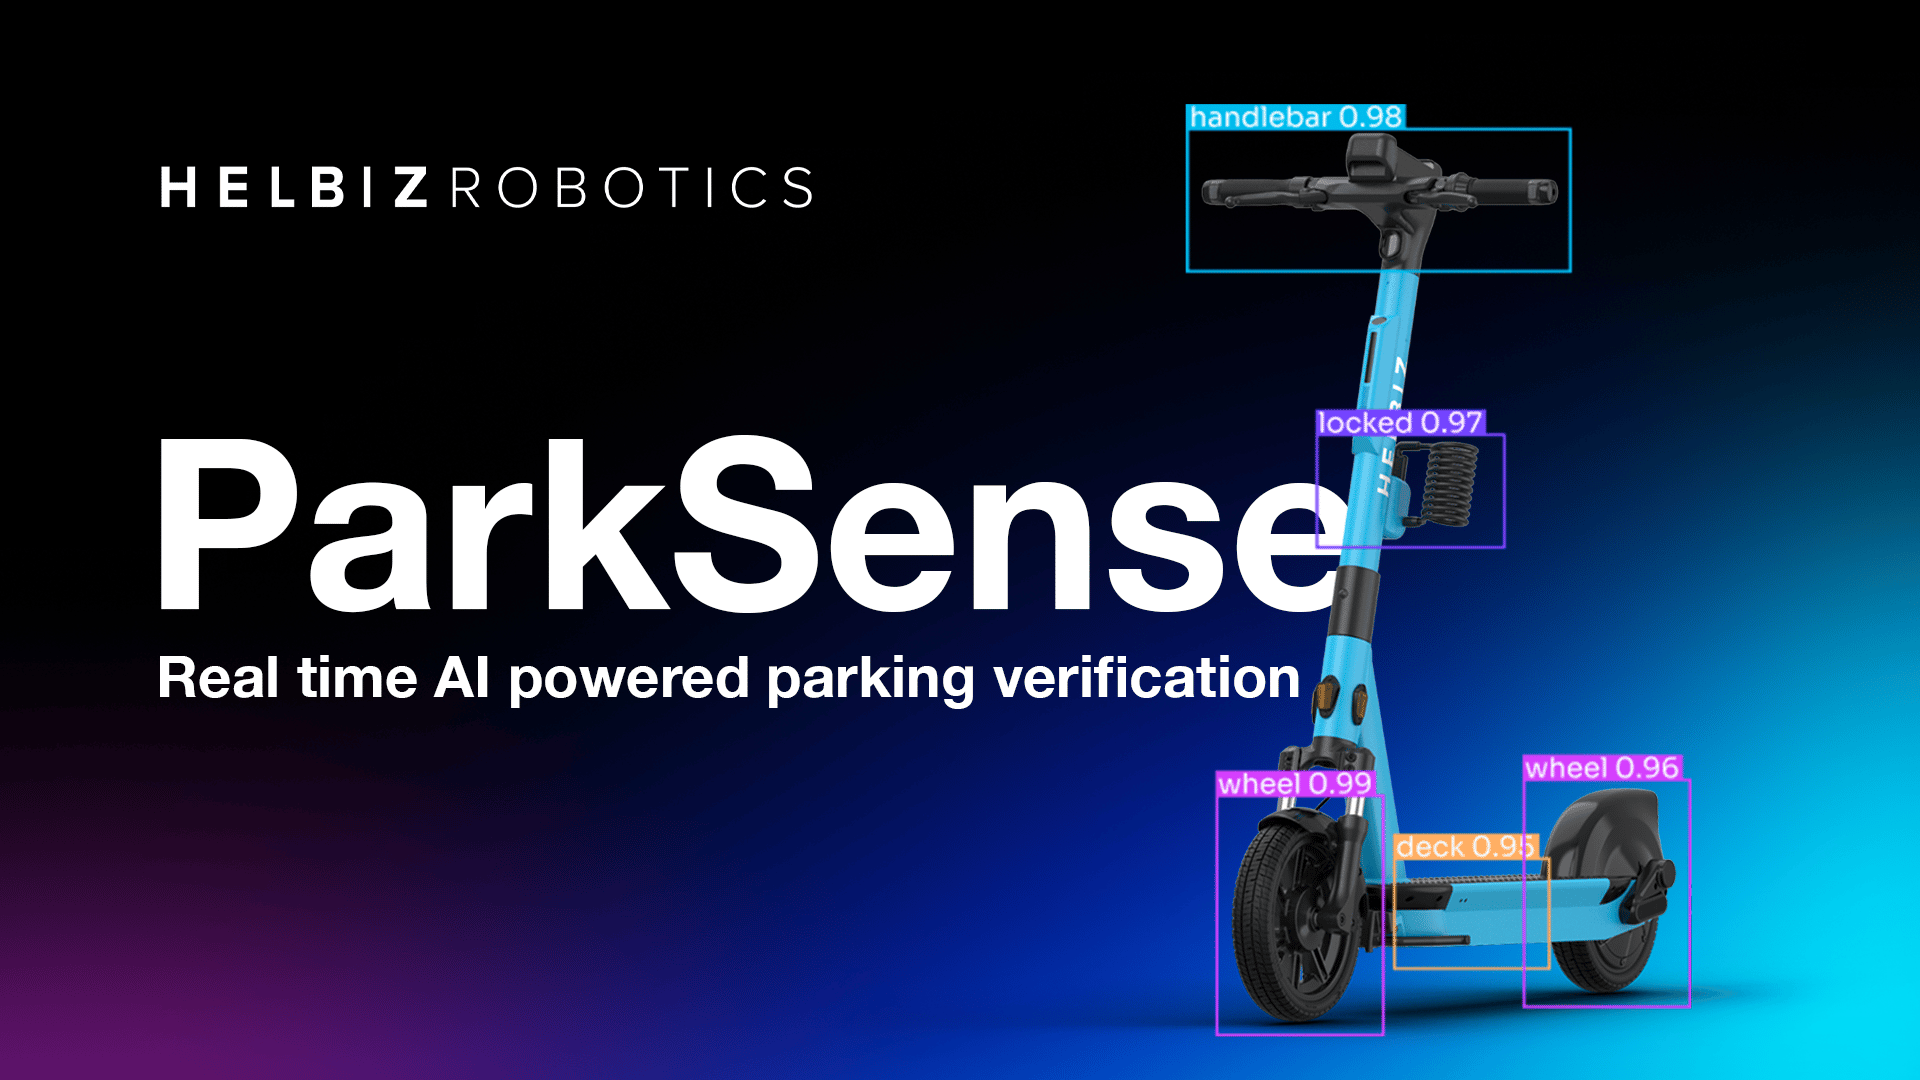 Helbiz announces the debut of ParkSense, technology to validate thumbnail parking spaces